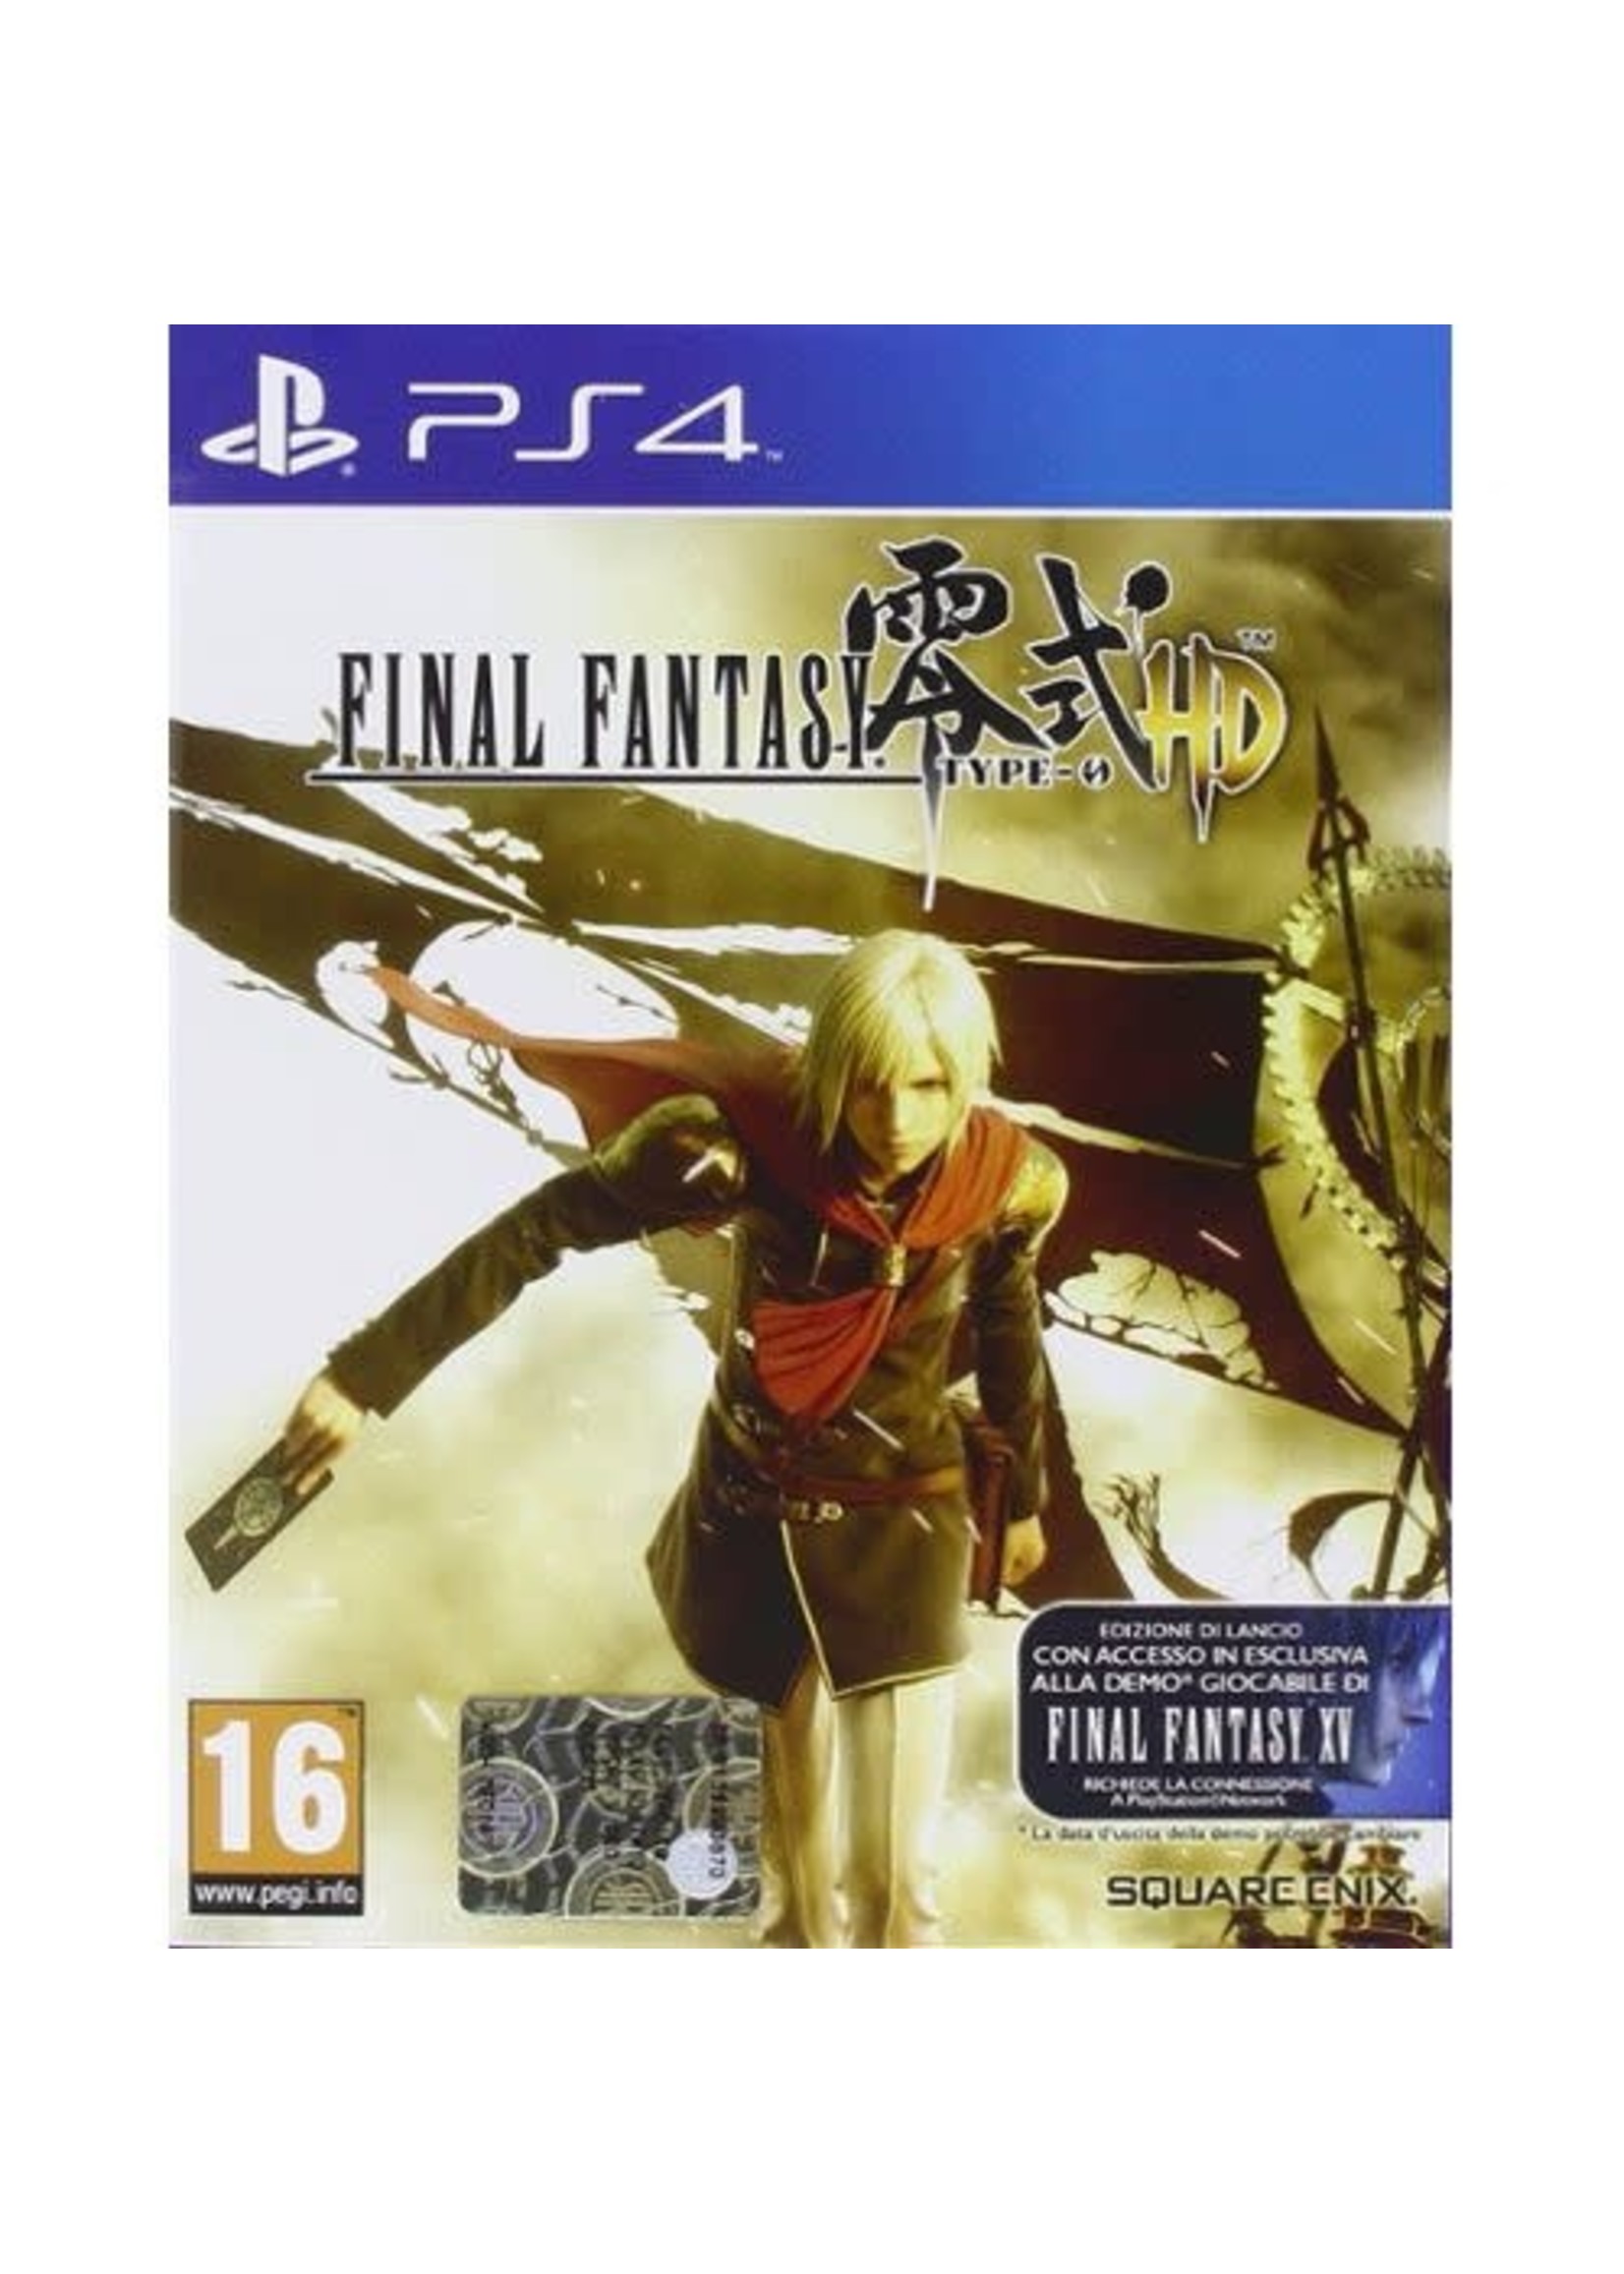 Final Fantasy: Type 0 HD - PS4 PrePlayed